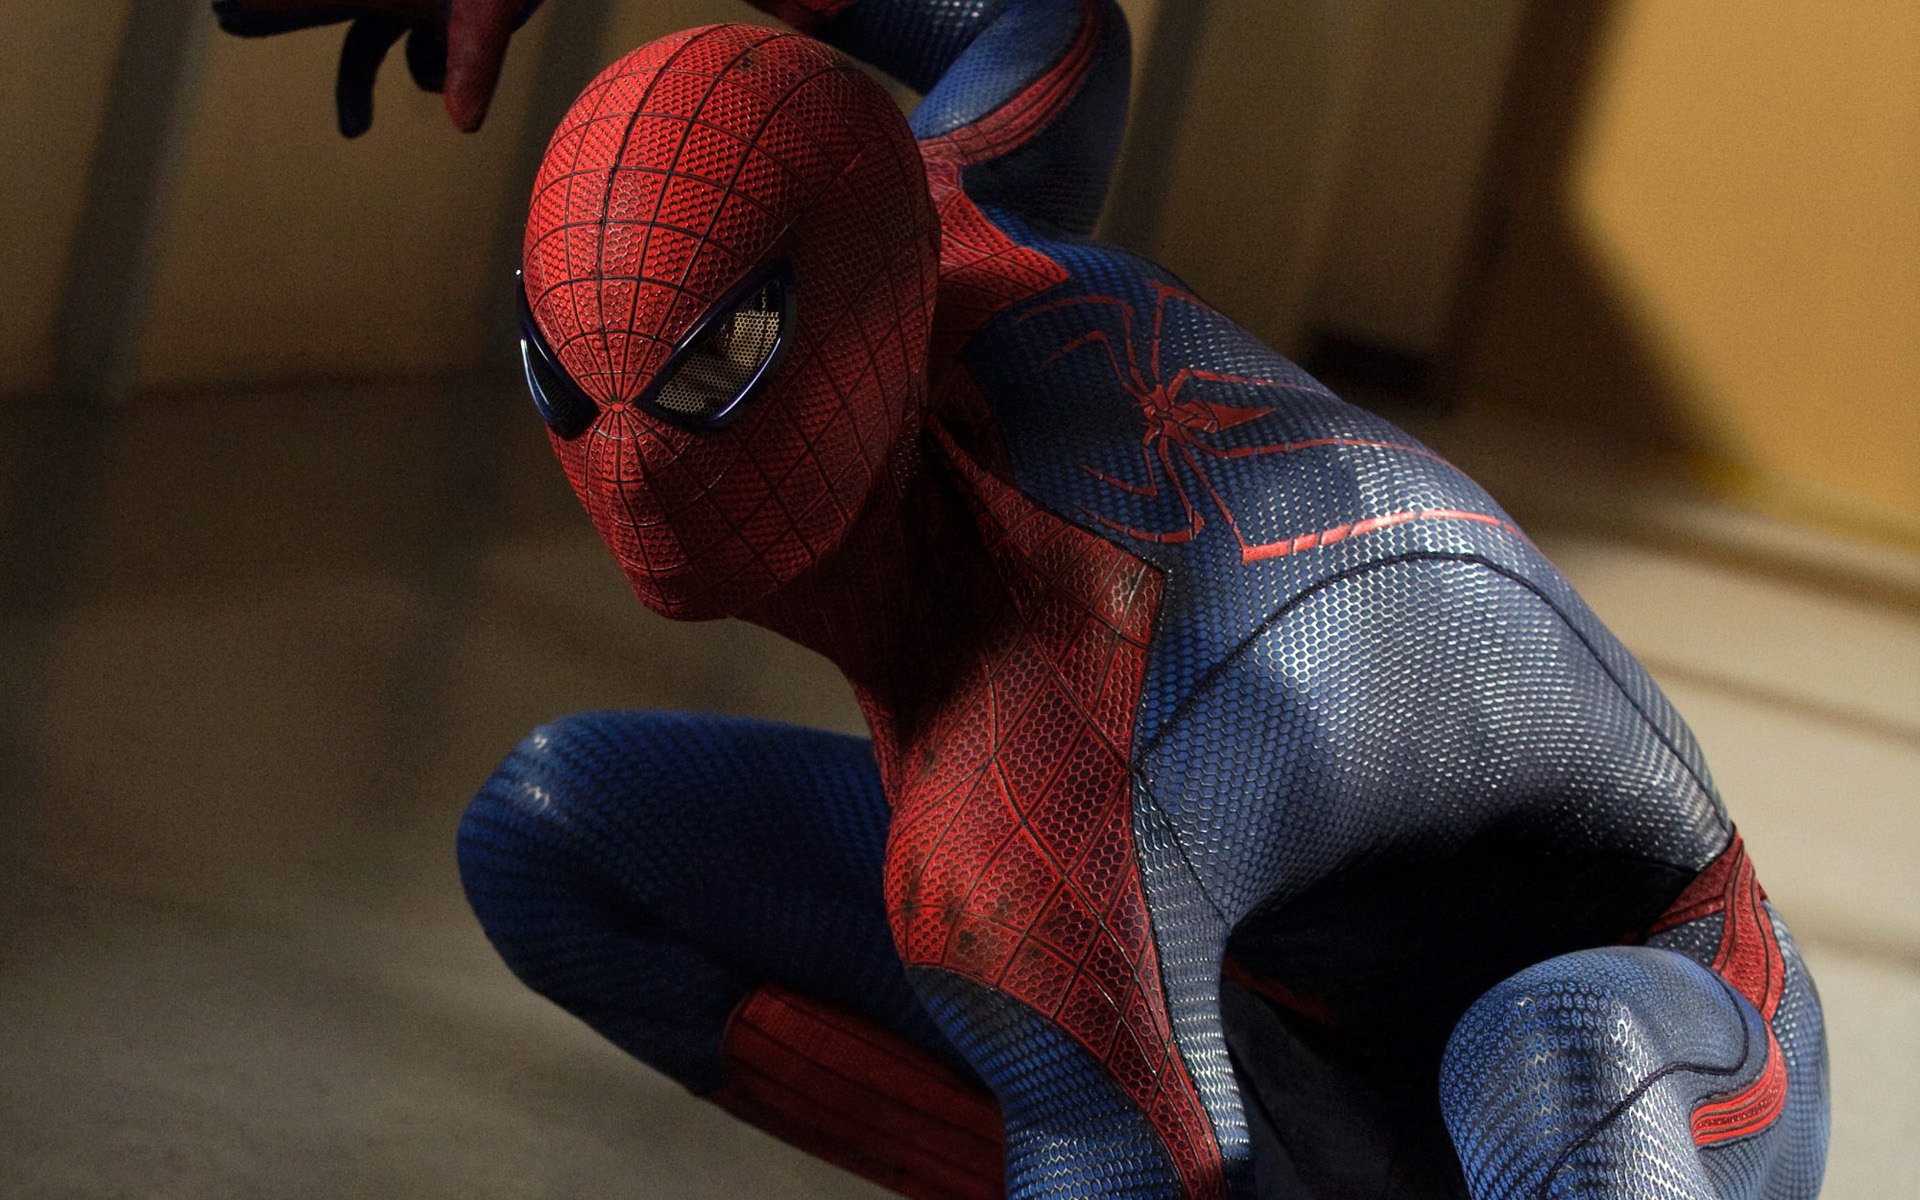 The Amazing Spider-Man 2012 wallpapers #3 - 1920x1200